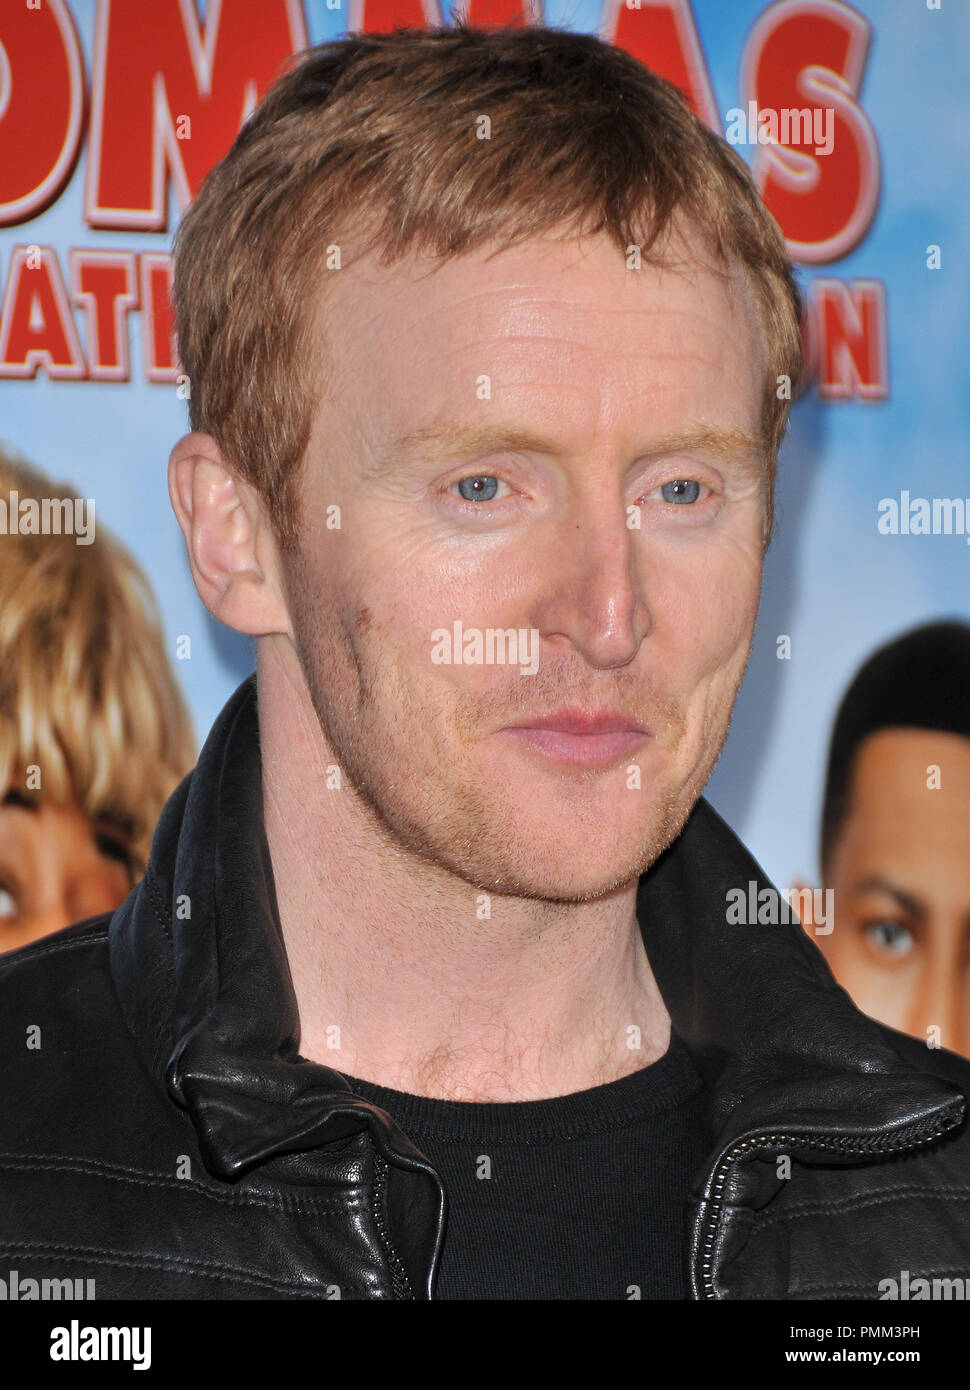 Tony Curran at the Los Angeles Premiere of 'Big Mommas Like Father, Like Son' held at the Arclight Cinerama Dome in Hollywood, CA. The event took place on Thursday, February 10, 2011. Photo by PRPP Pacific Rim Photo Press / PictureLux Stock Photo